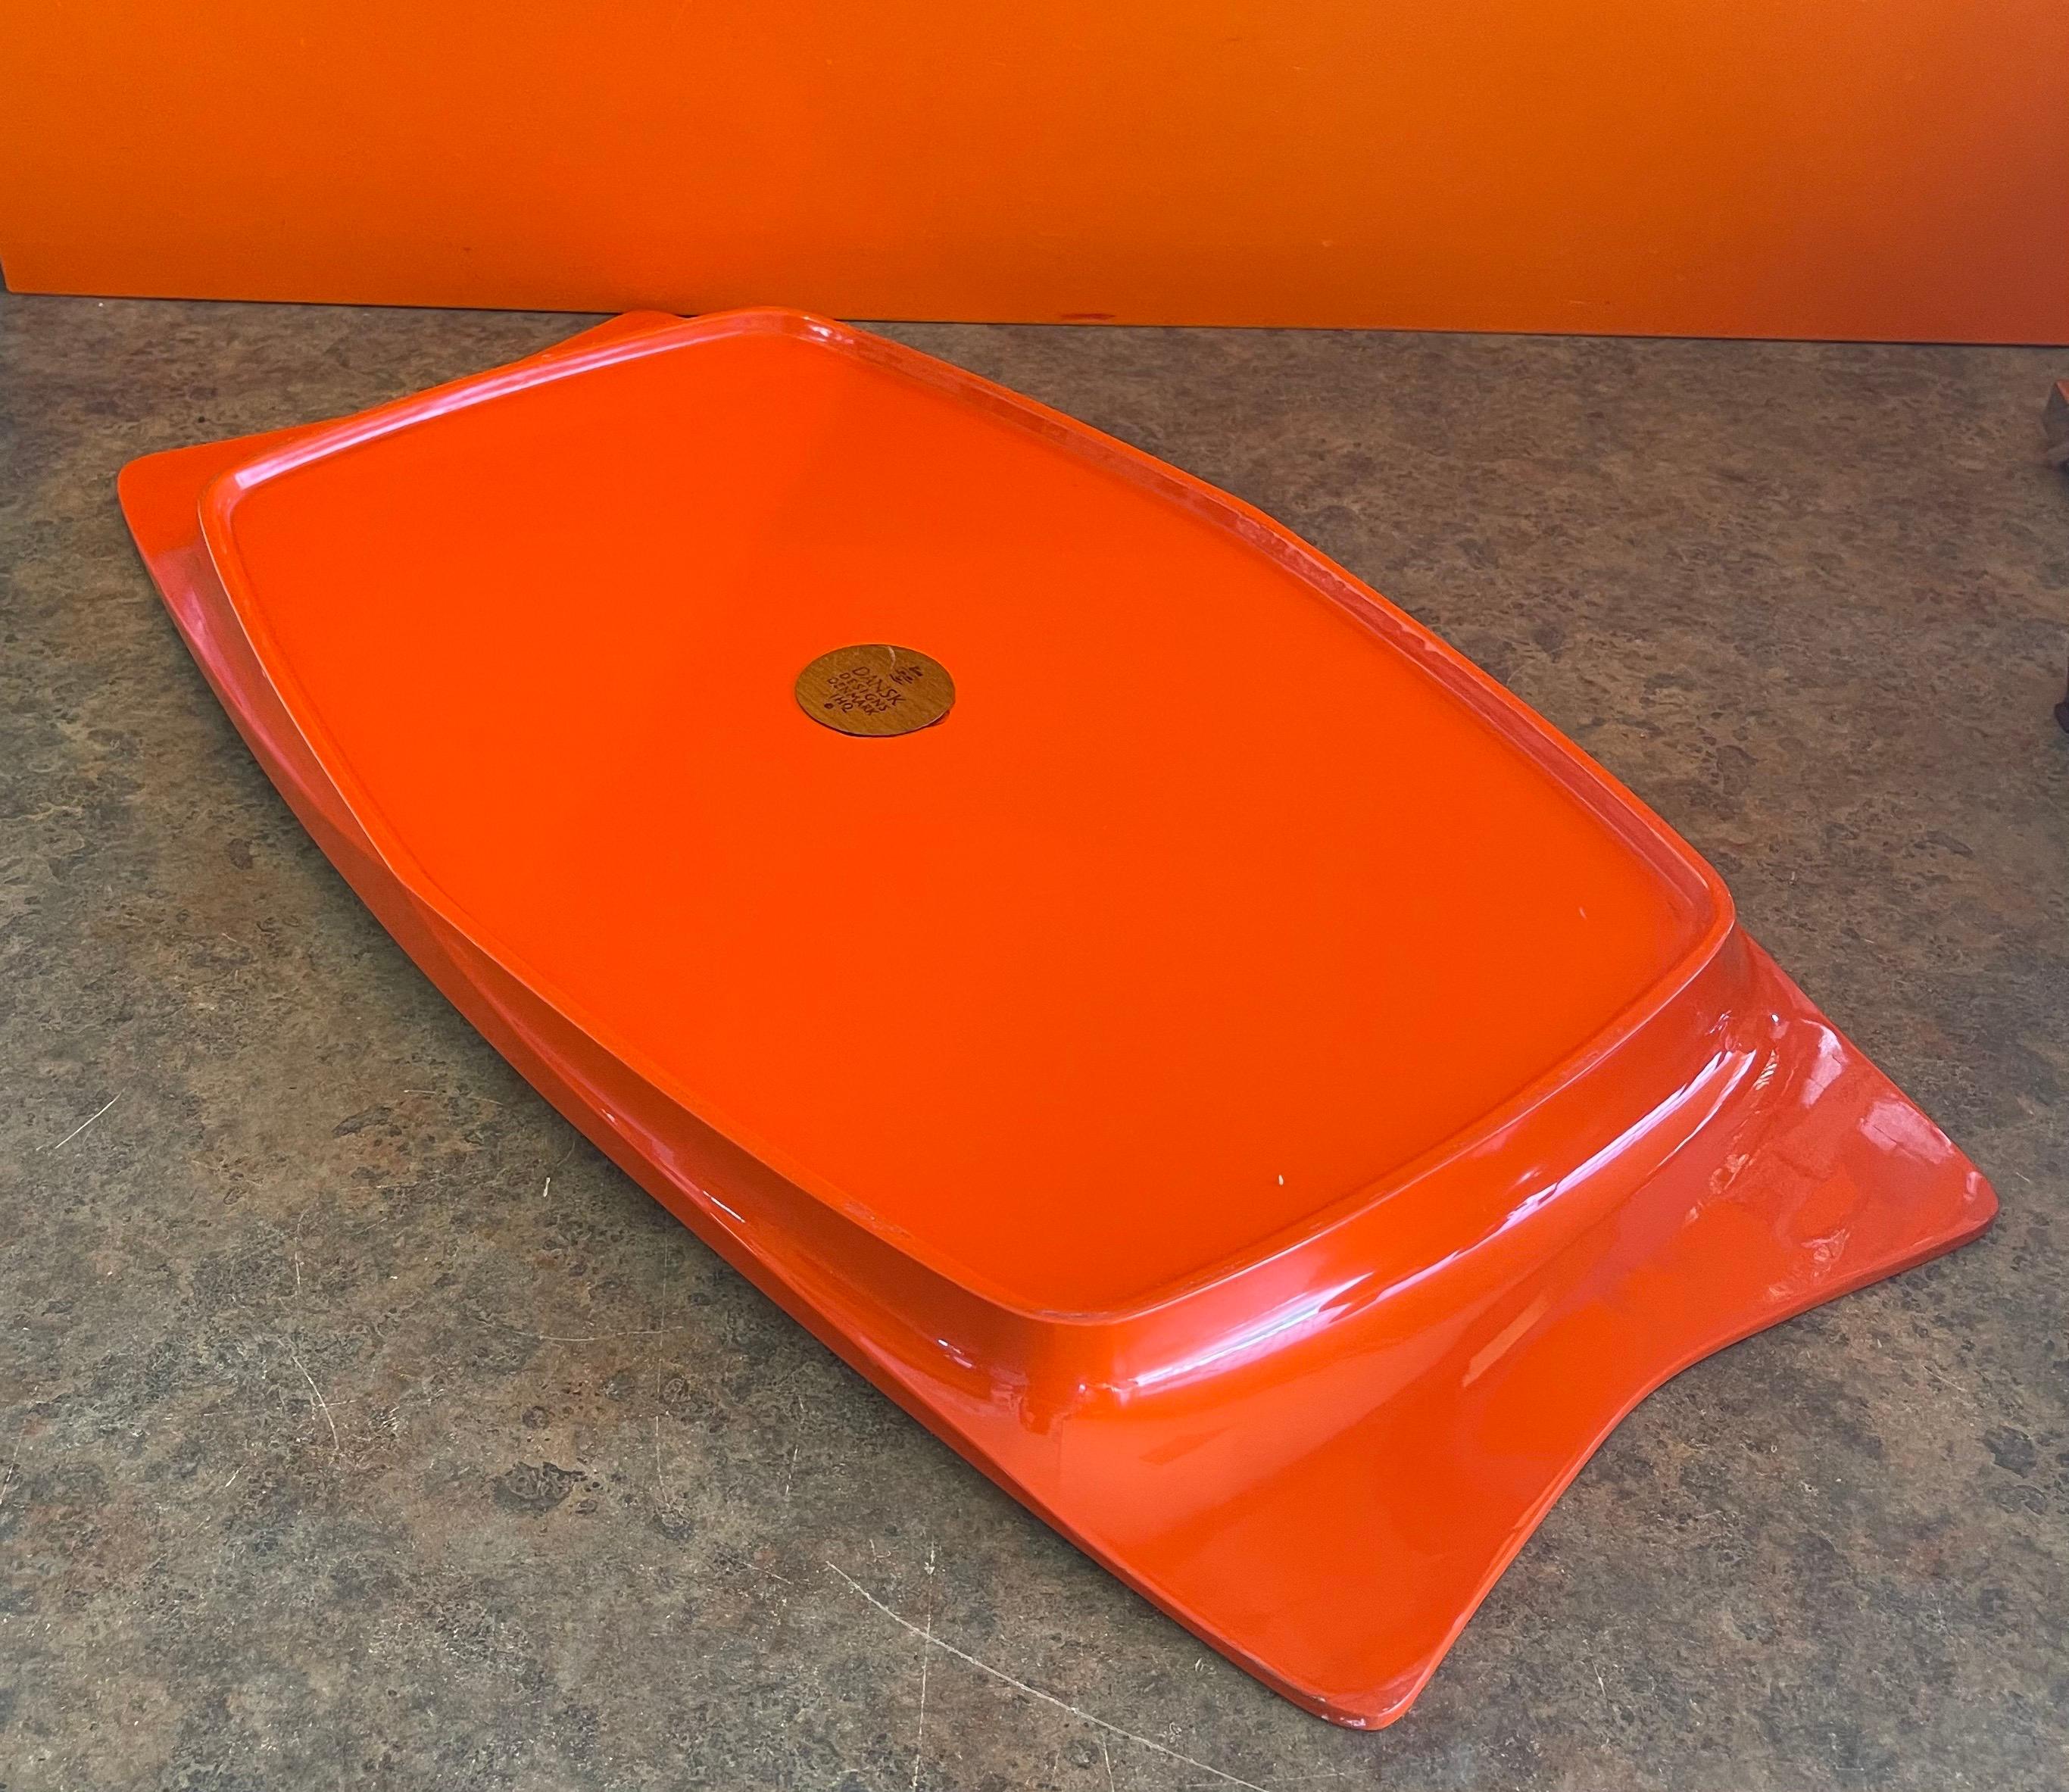 Maple Extra Large Orange Lacquer Tray by Jens Quistgaard for Dansk- Early Production